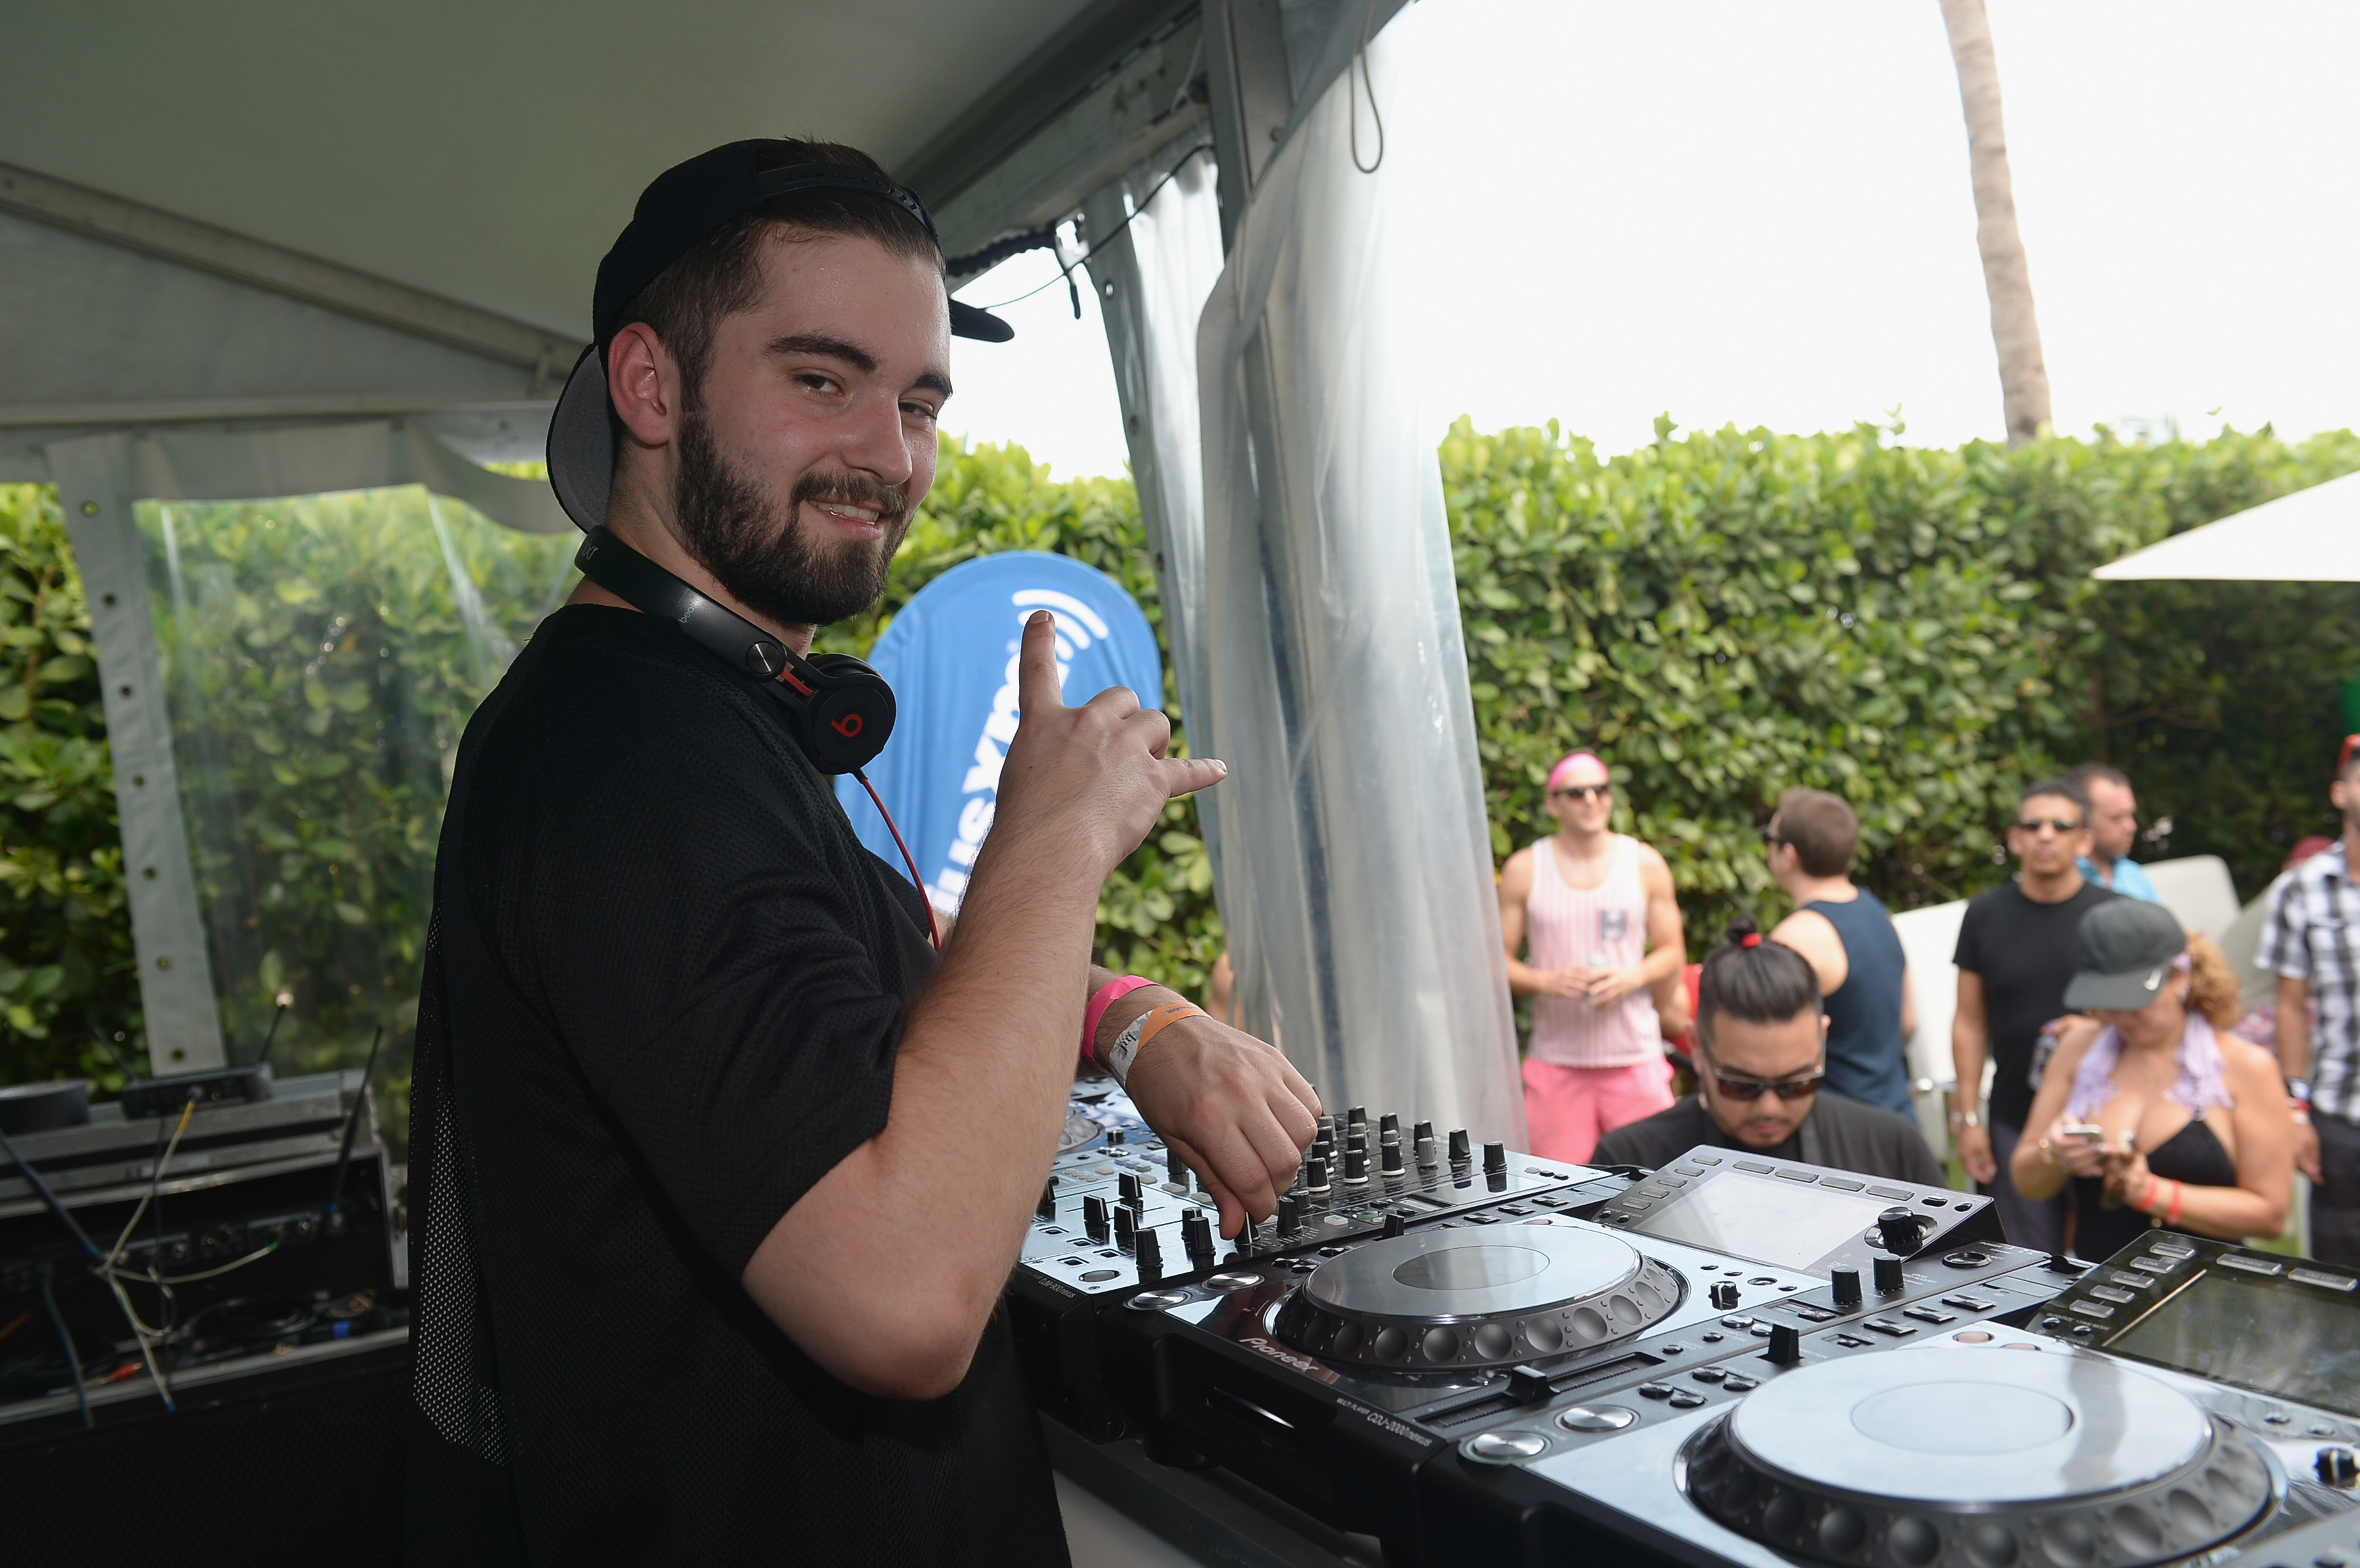 Dyro performs at SiriusXM"s "UMF Radio" Broadcast Live From The SiriusXM Music Lounge at W Hotel